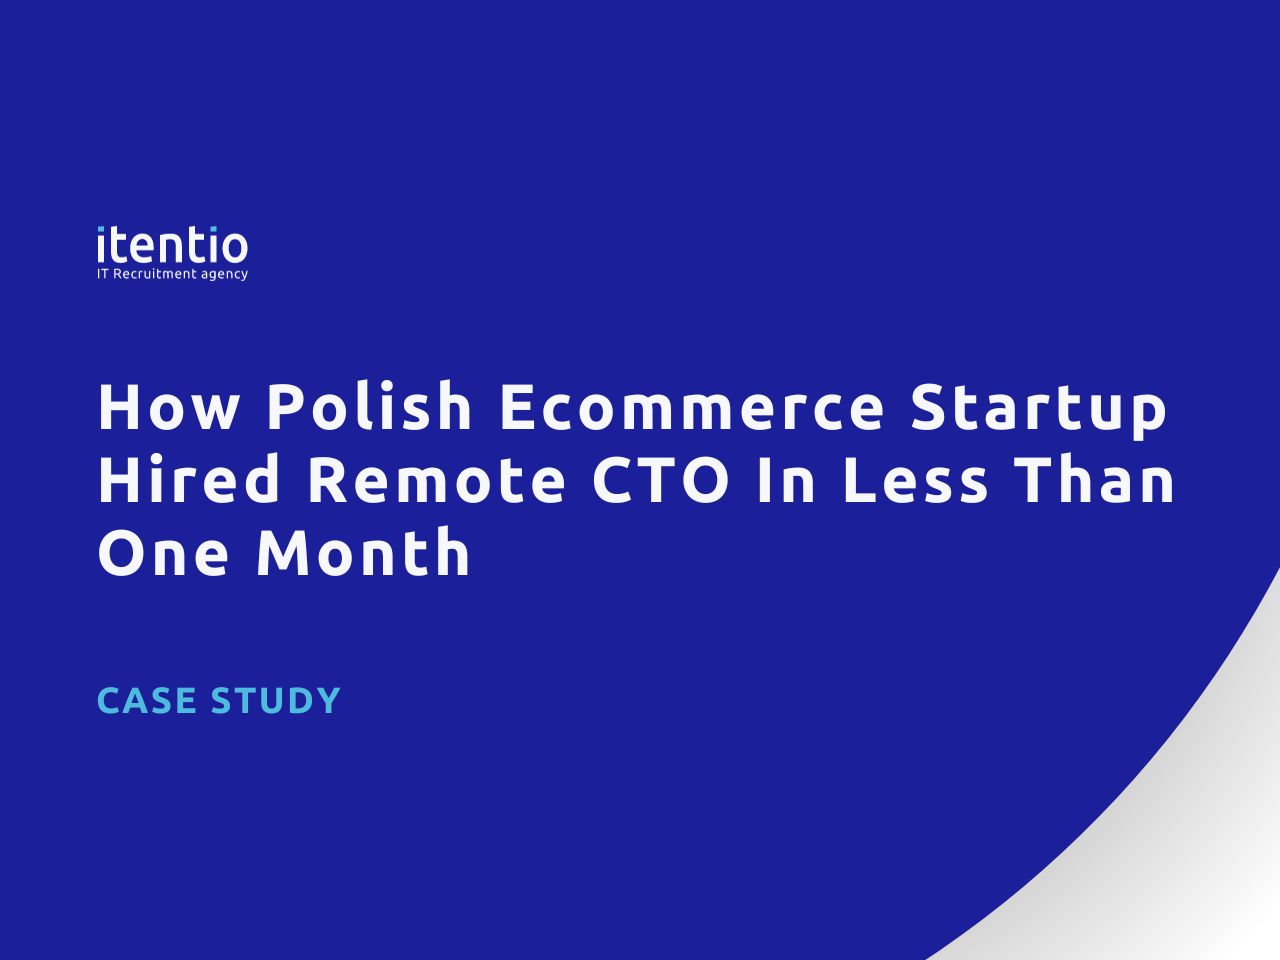 How Polish Ecommerce Startup Hired Remote CTO In Less Than One Month